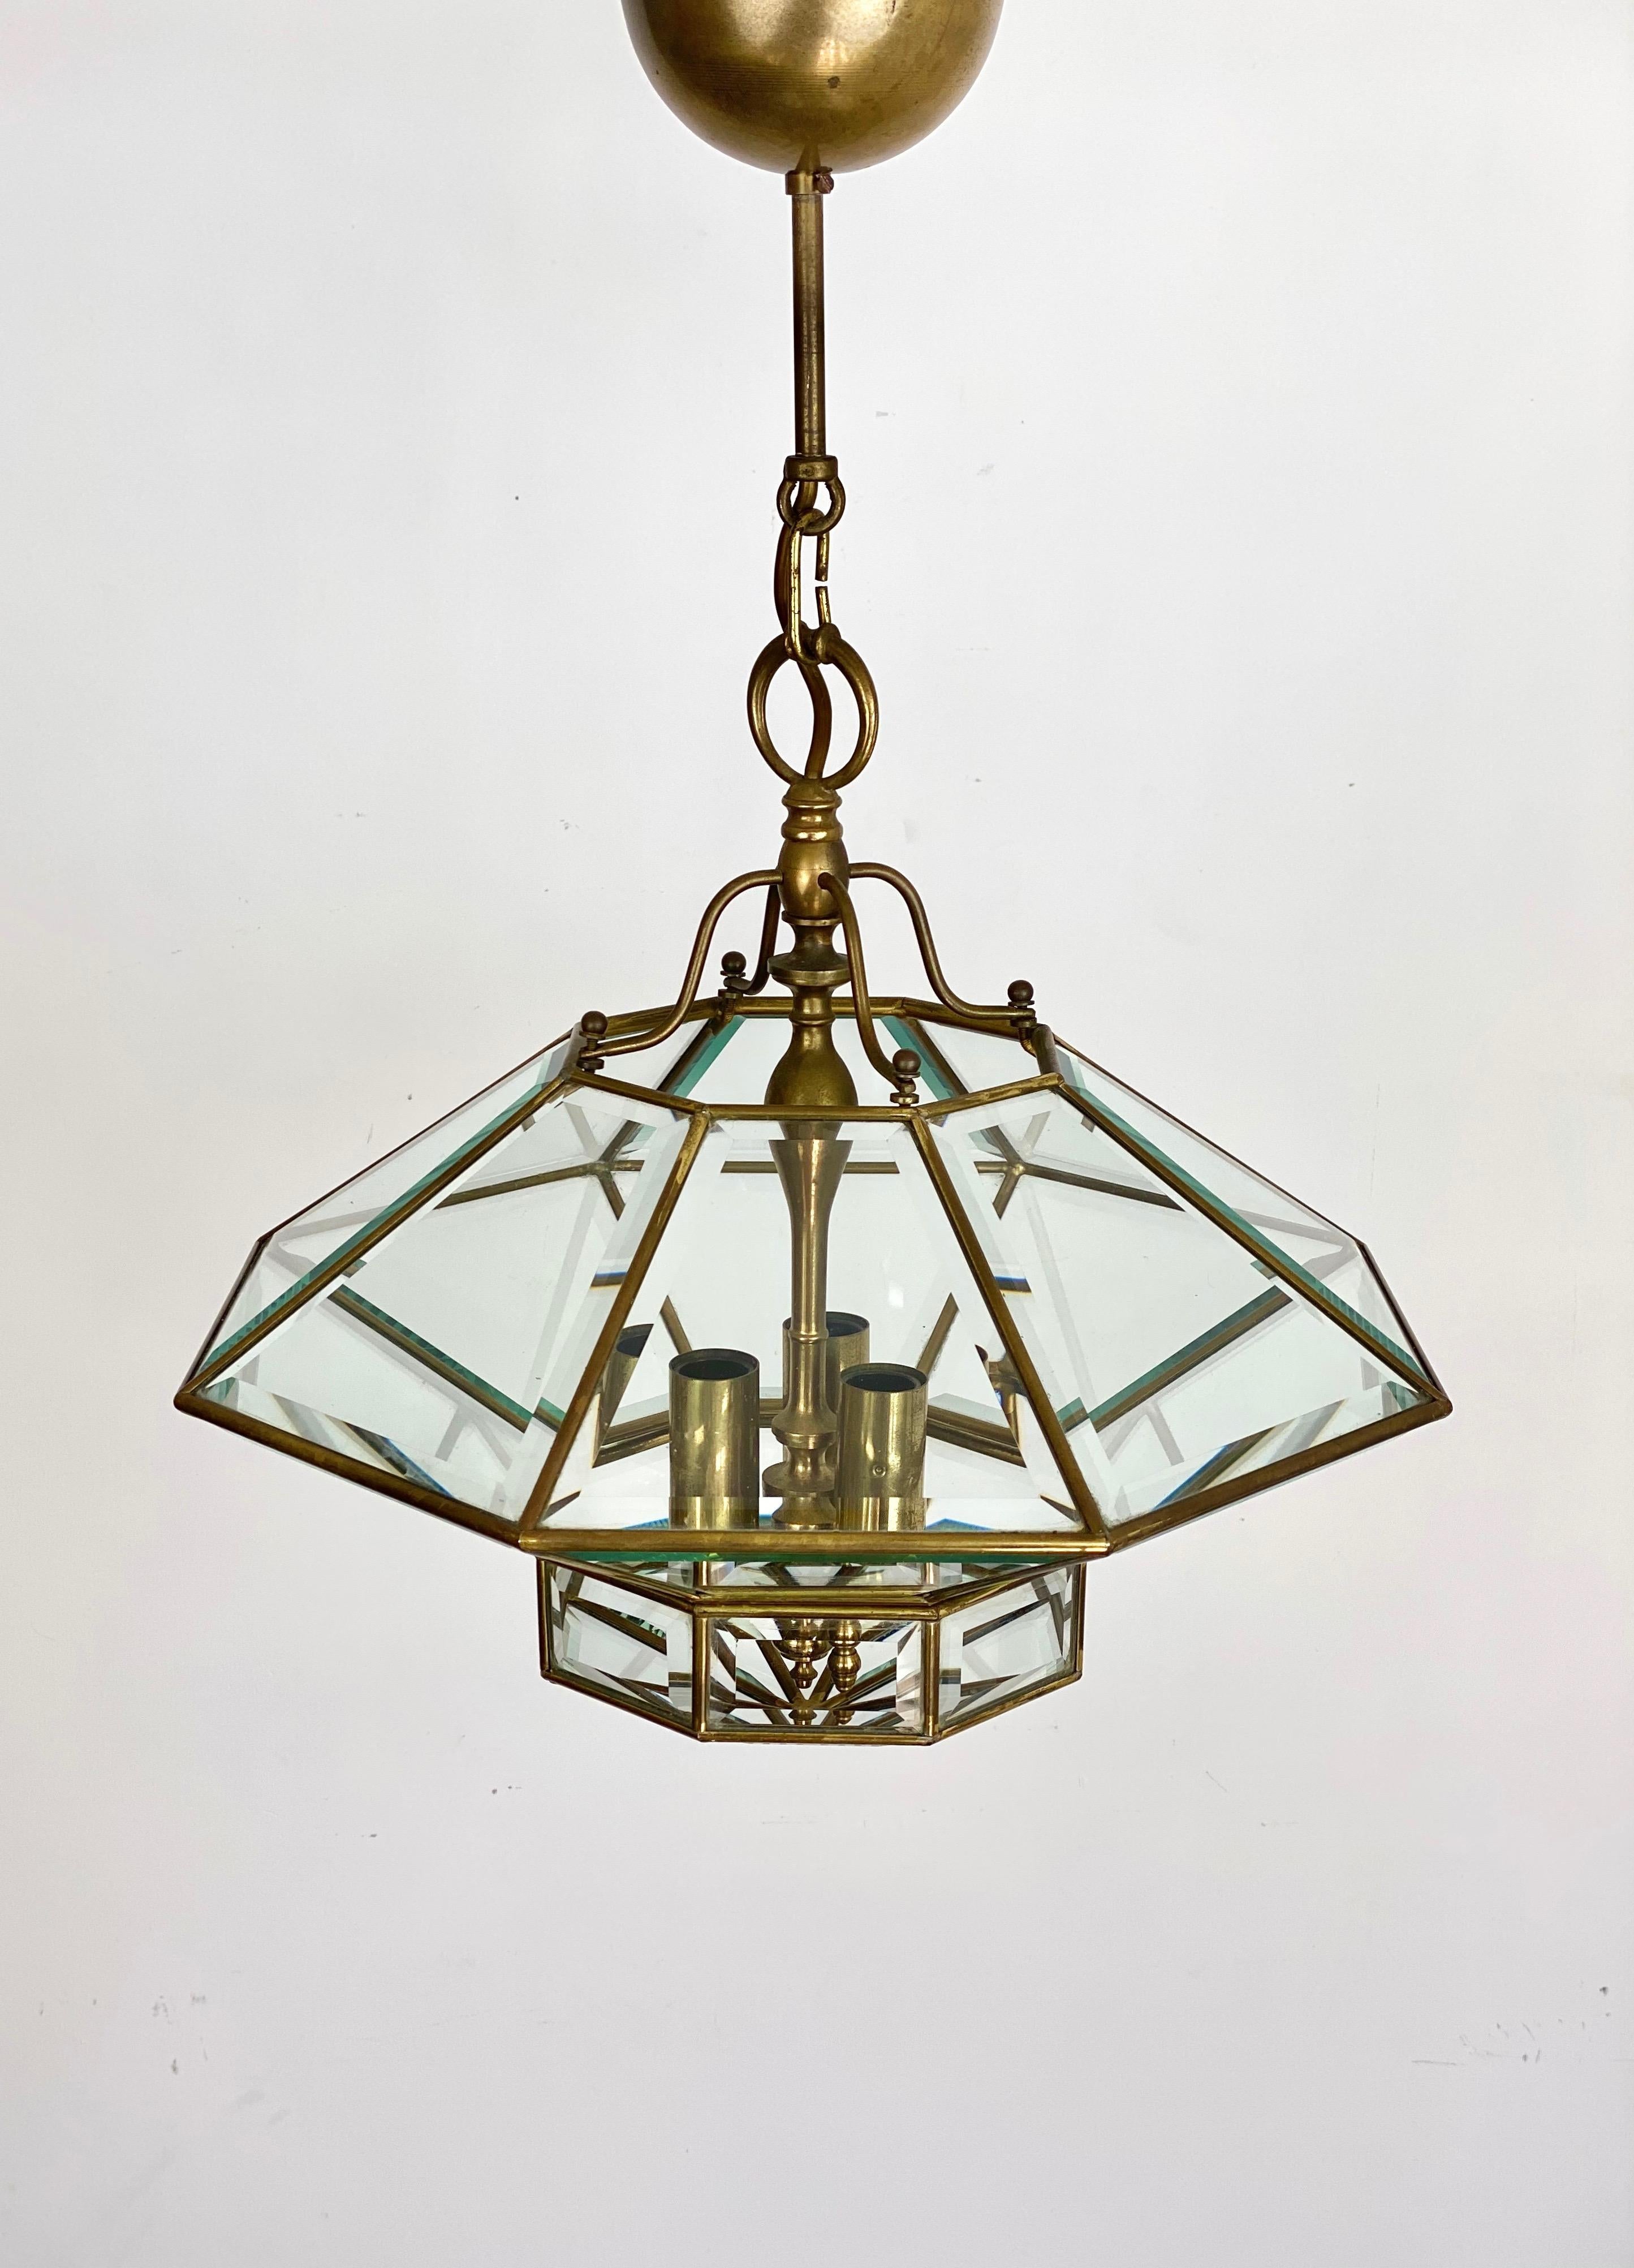 Diamond-shaped chandelier lantern in a brass and glass structure in the style of the Italian designer house Fontana Arte. Made in Italy, circa 1960.